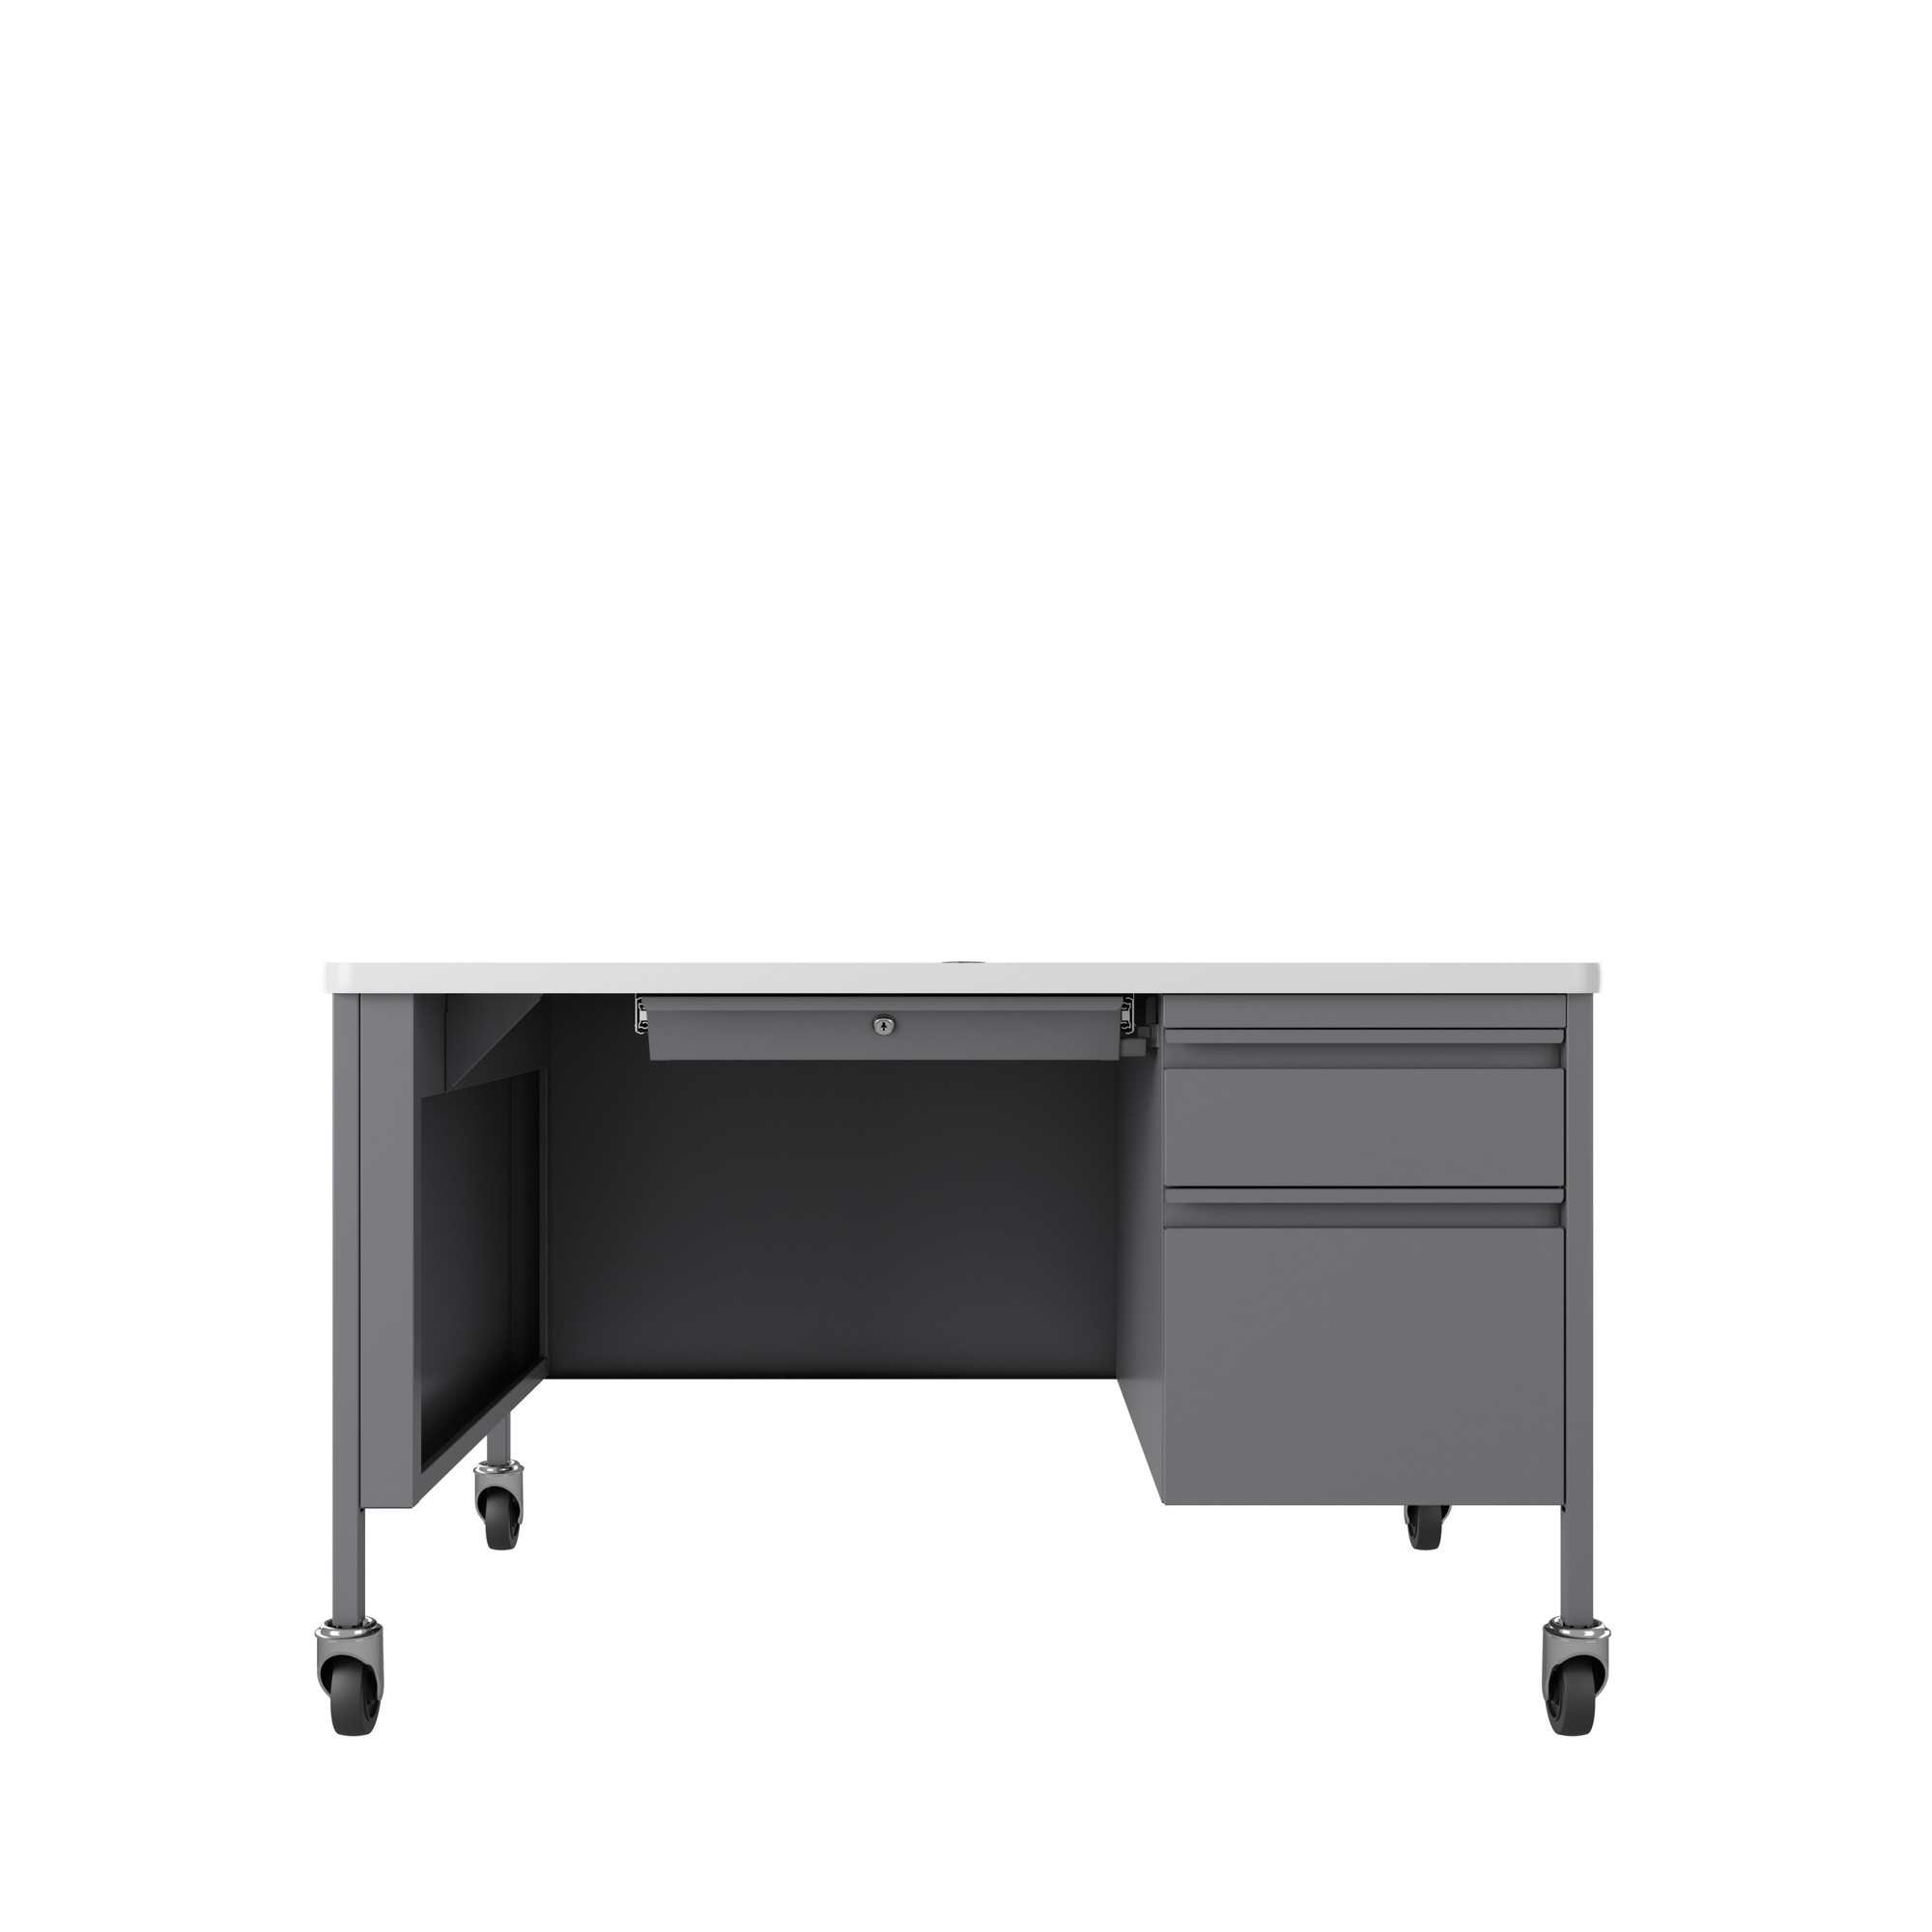 Hirsh Industries, Right Hand Ped Desk with Rounded Corner T-Mold Top, Width 48 in, Height 29.5 in, Depth 30 in, Model 22657